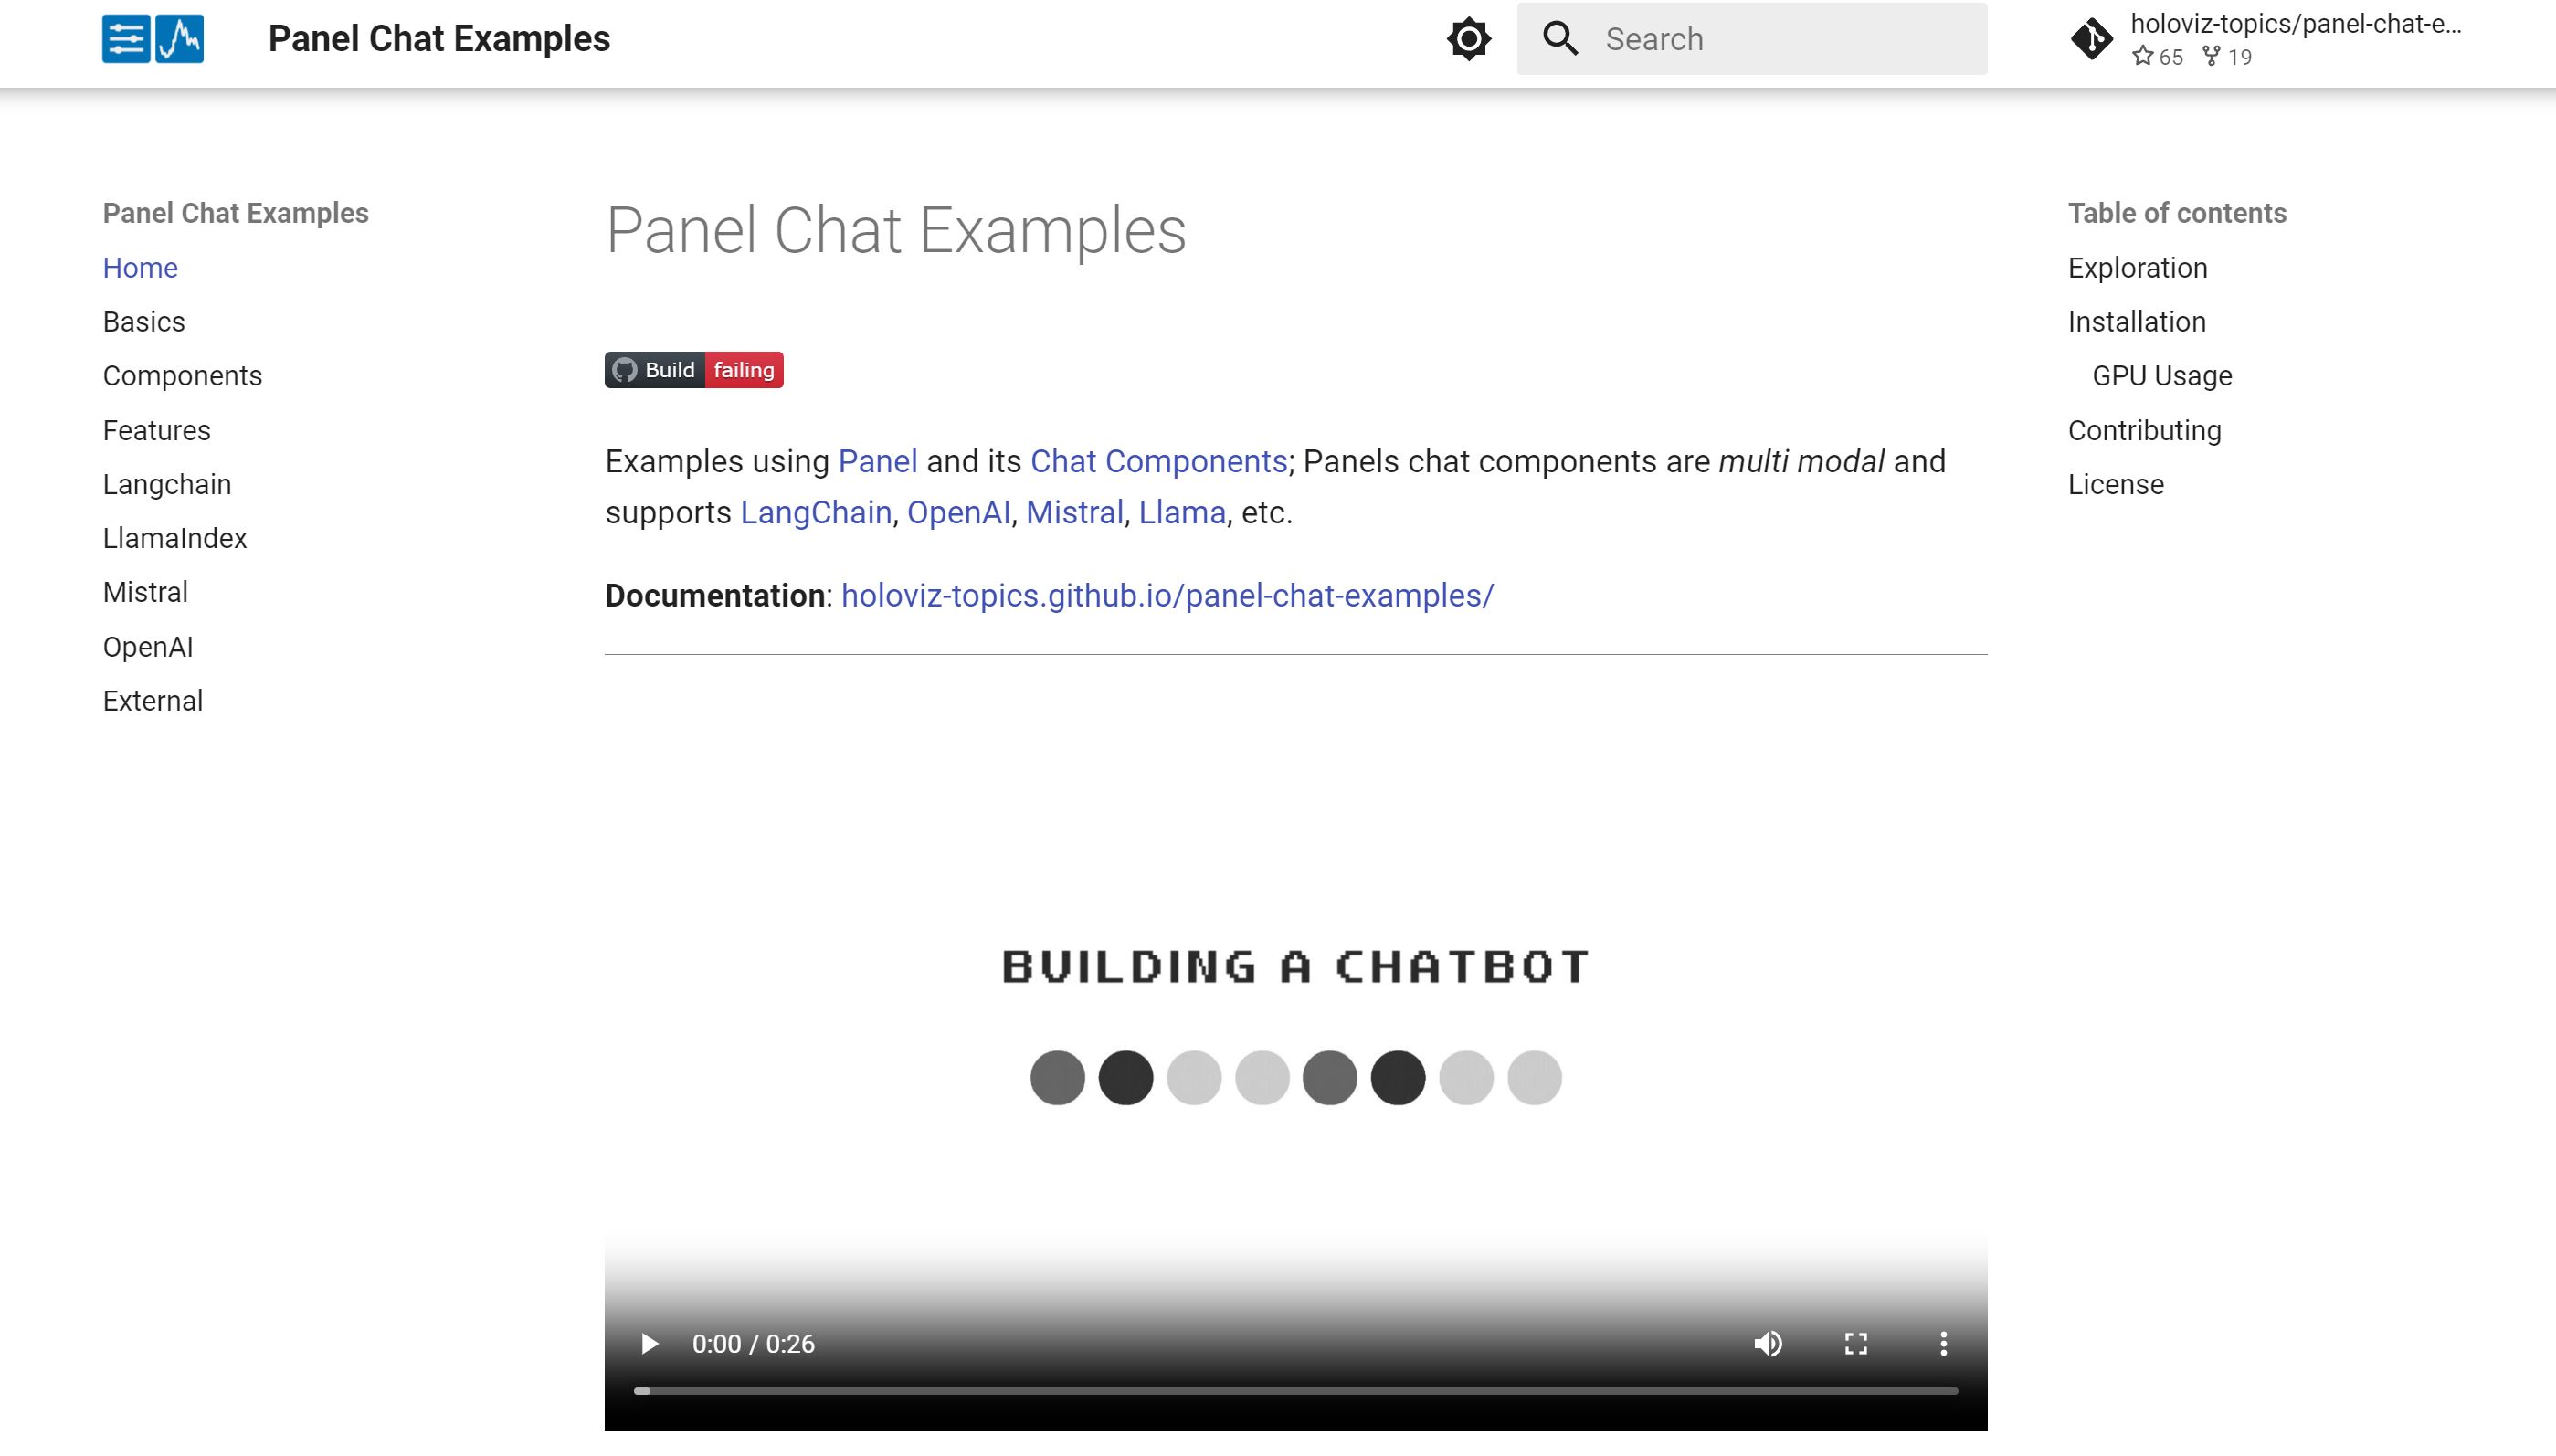 Panel Chat Examples